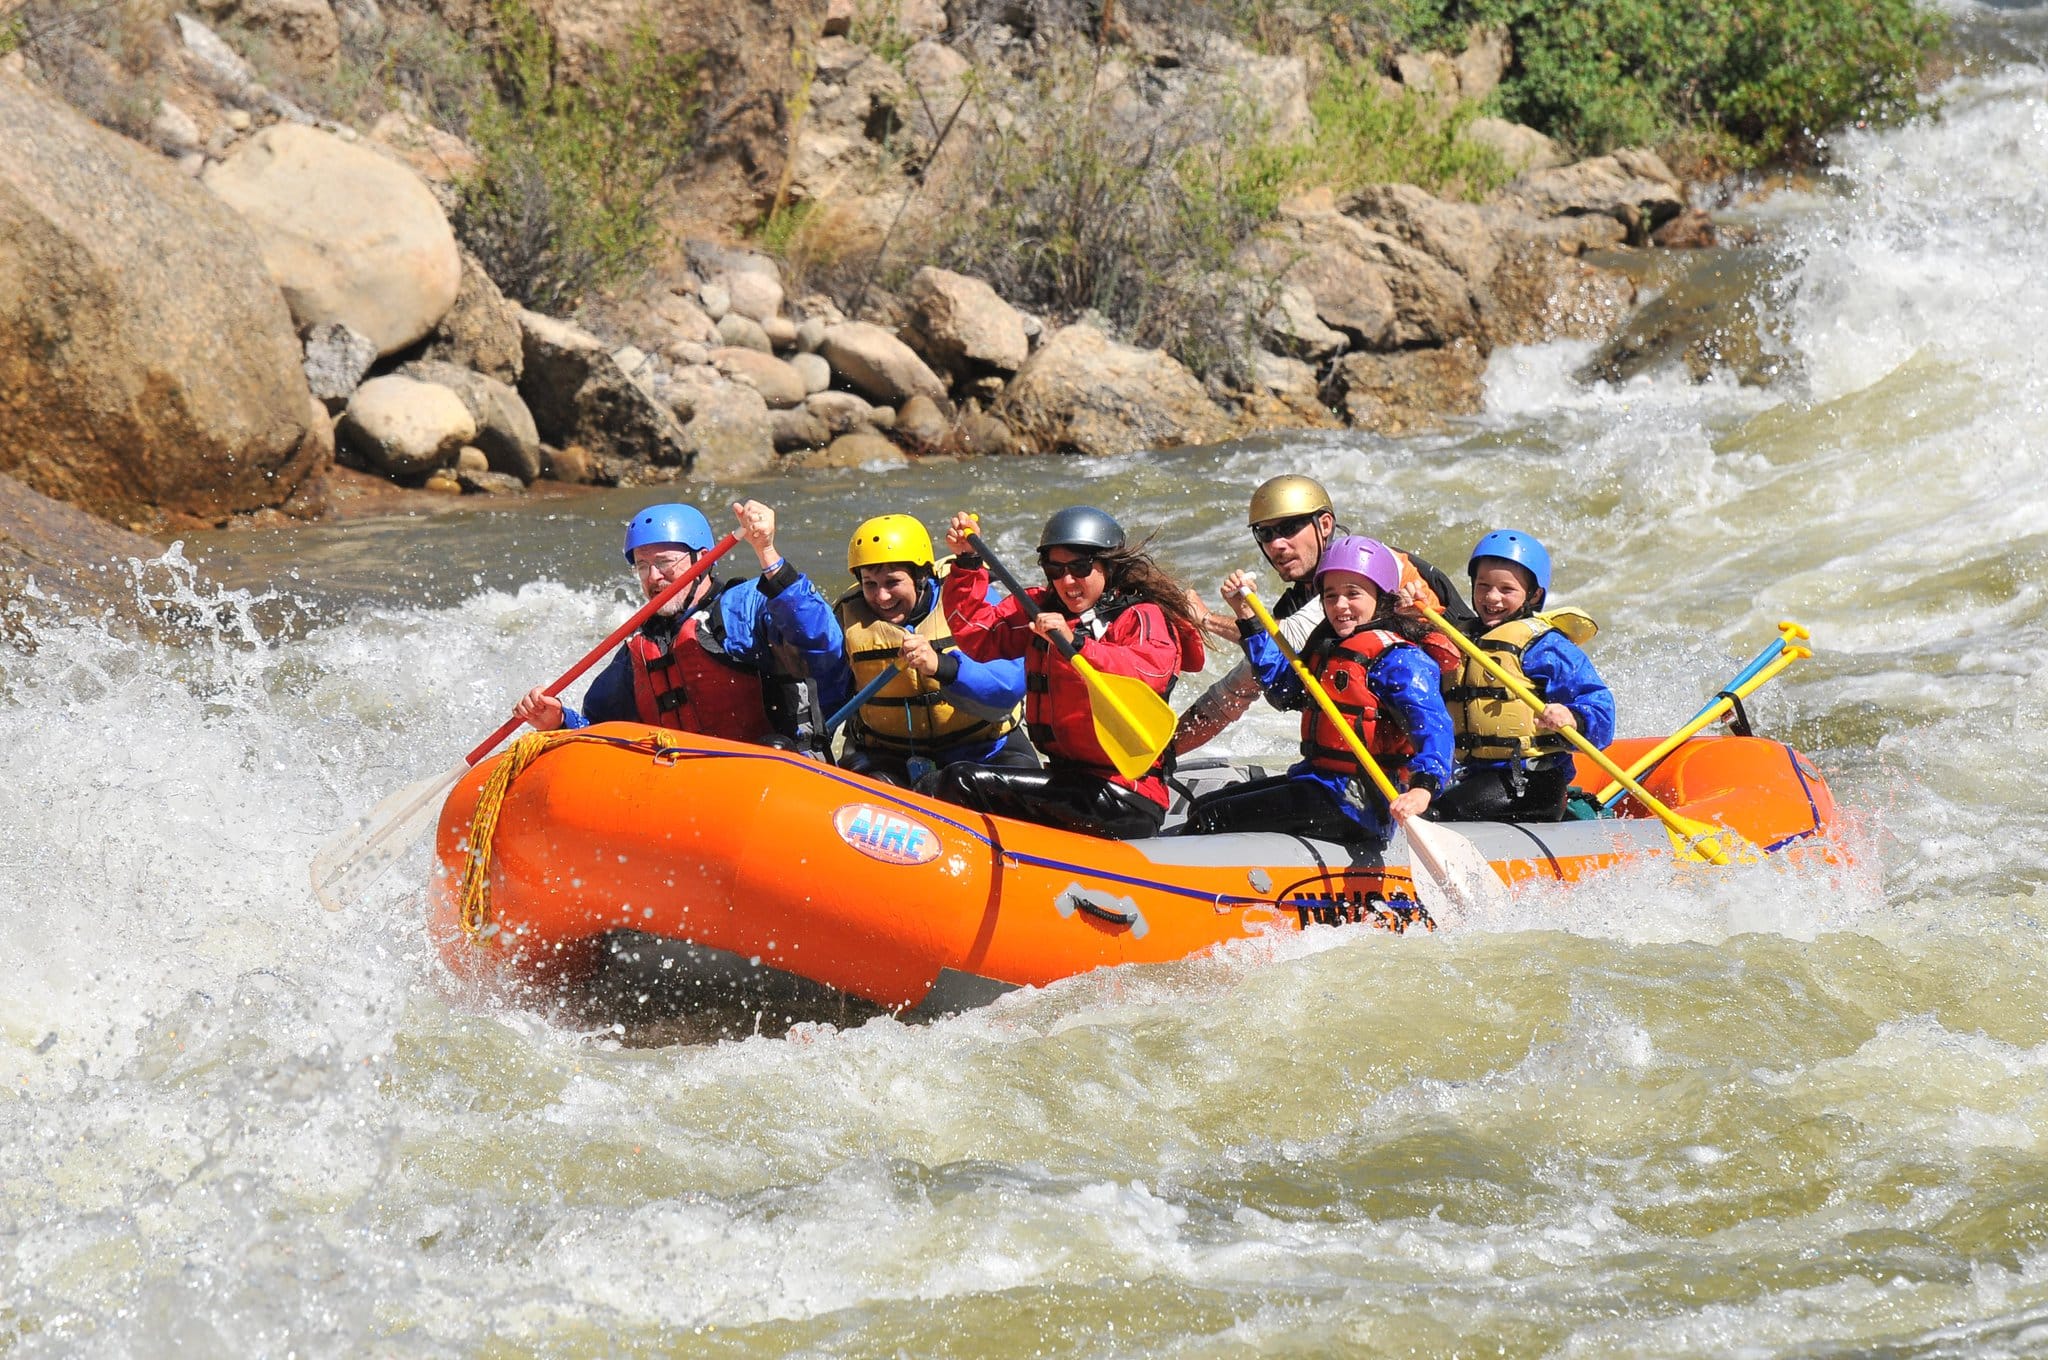 Raft group enjoing the rapids in a river.